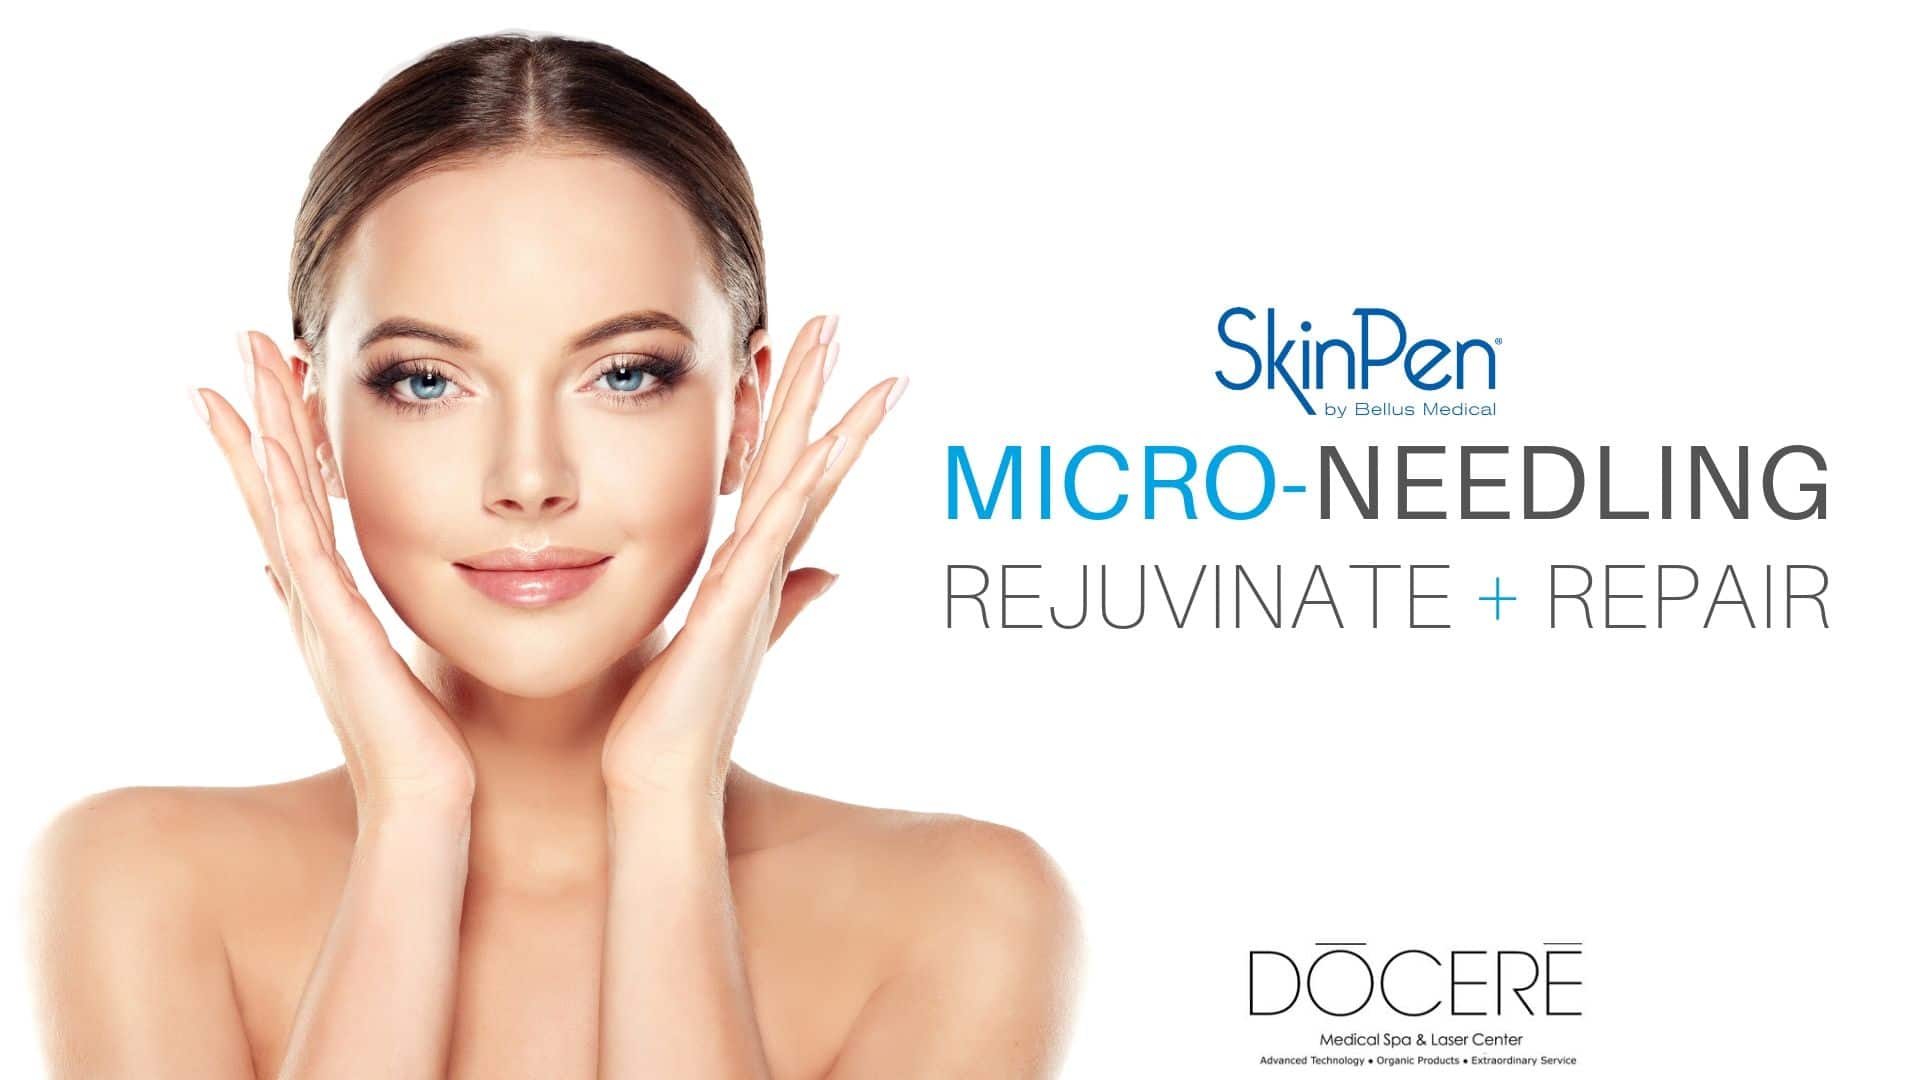 Woman smiling and framing her clear and smooth skin after skinpen microneedling at docere medspa.